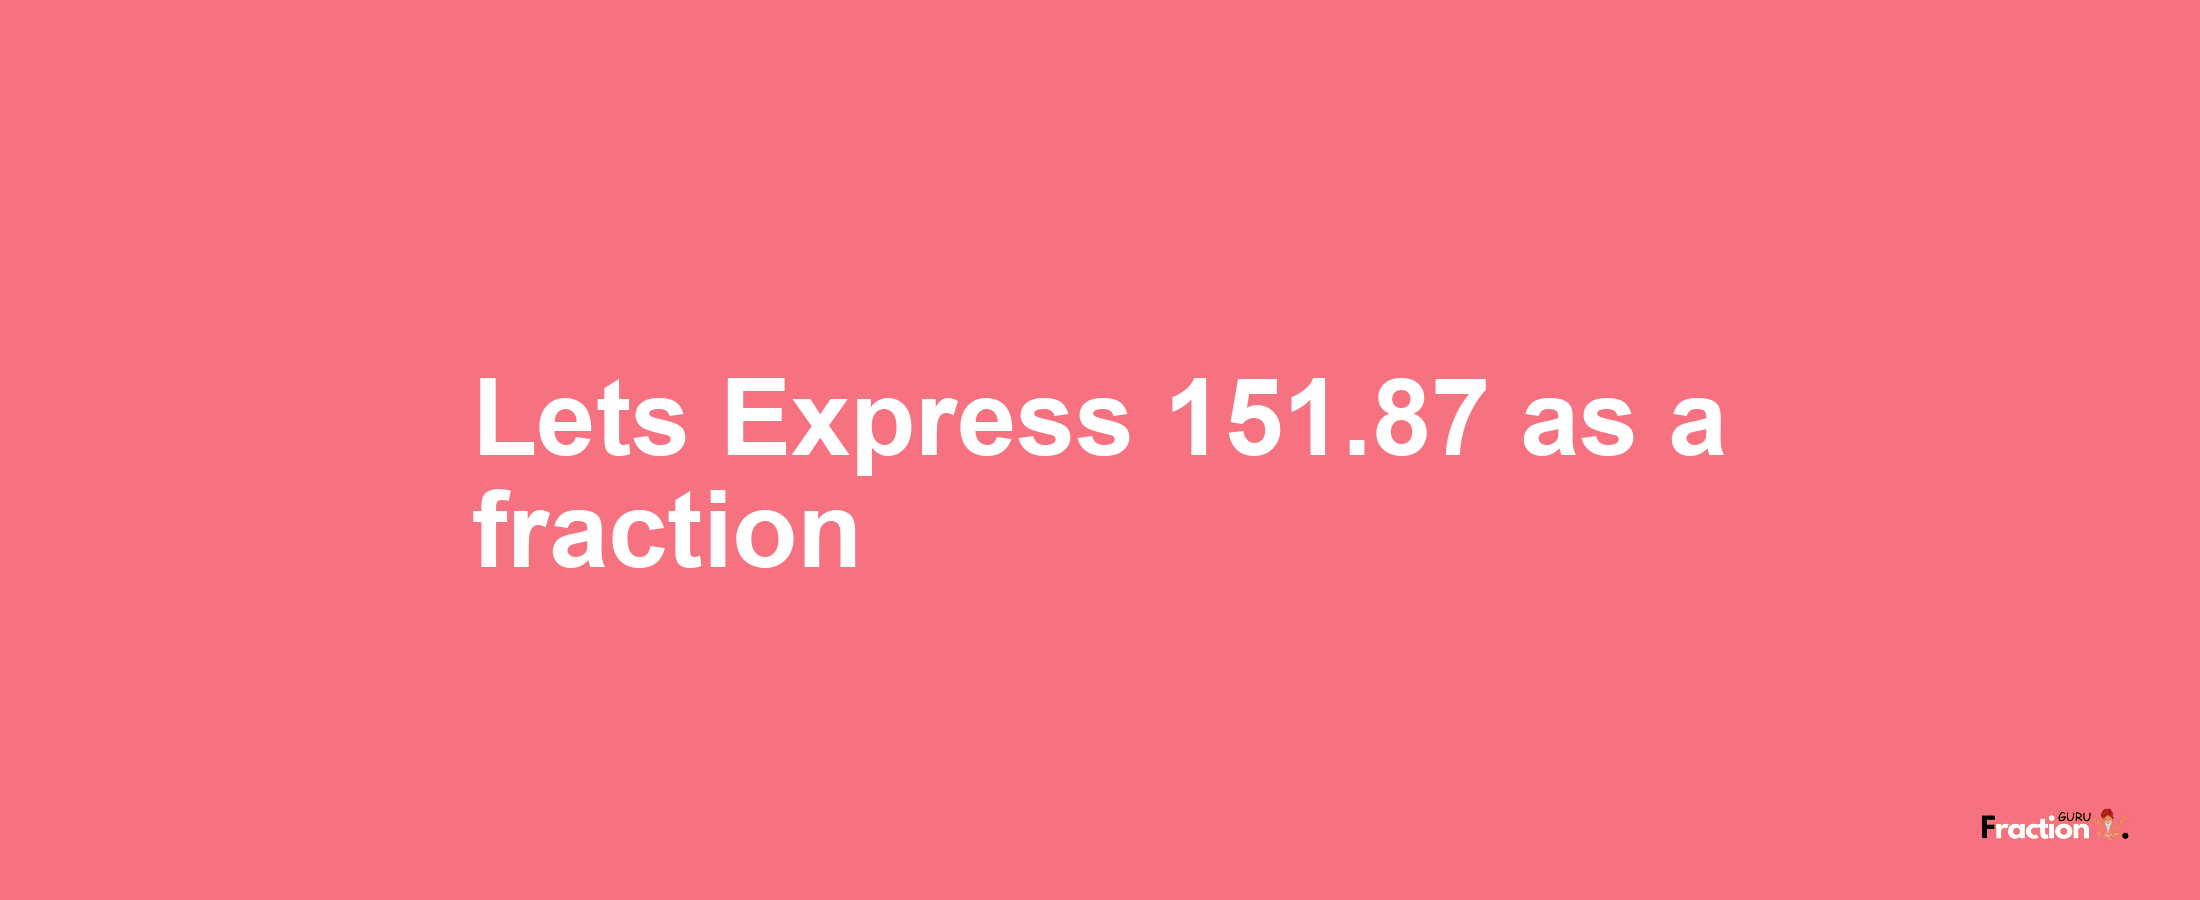 Lets Express 151.87 as afraction